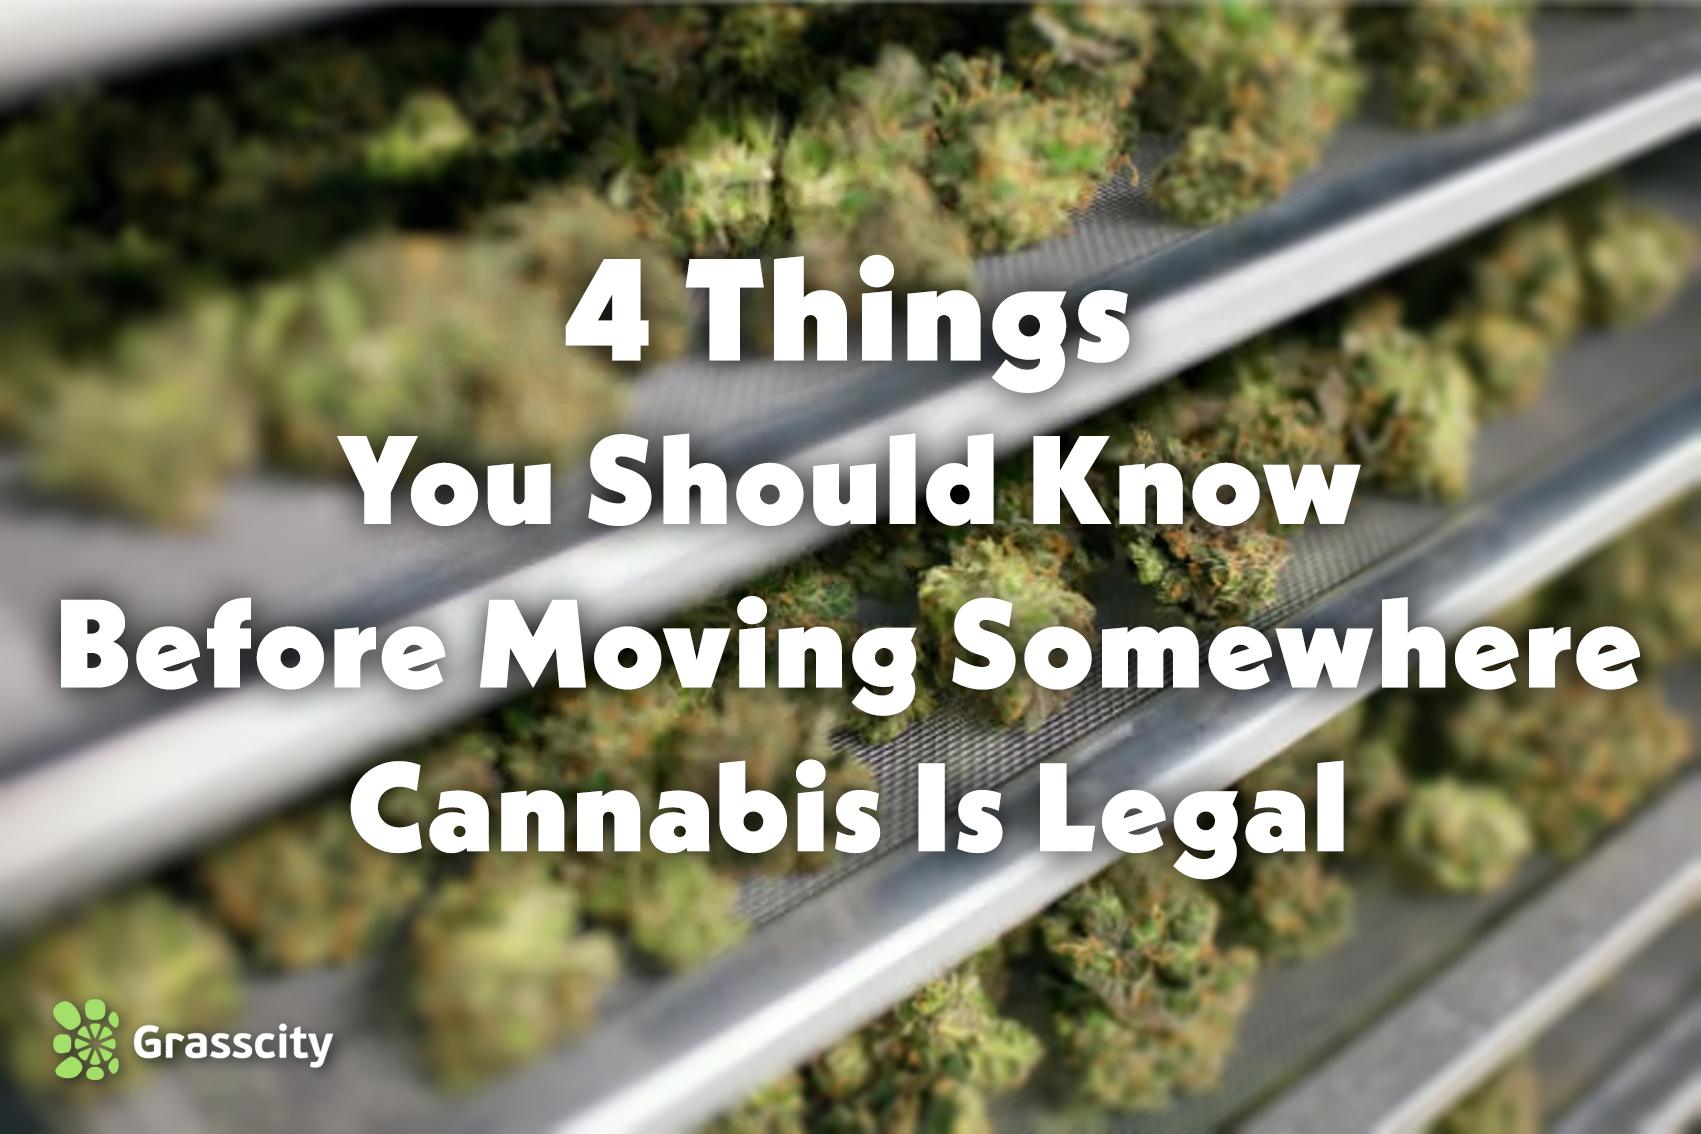 Things You Should Know Before Moving Somewhere Cannabis Is Legal